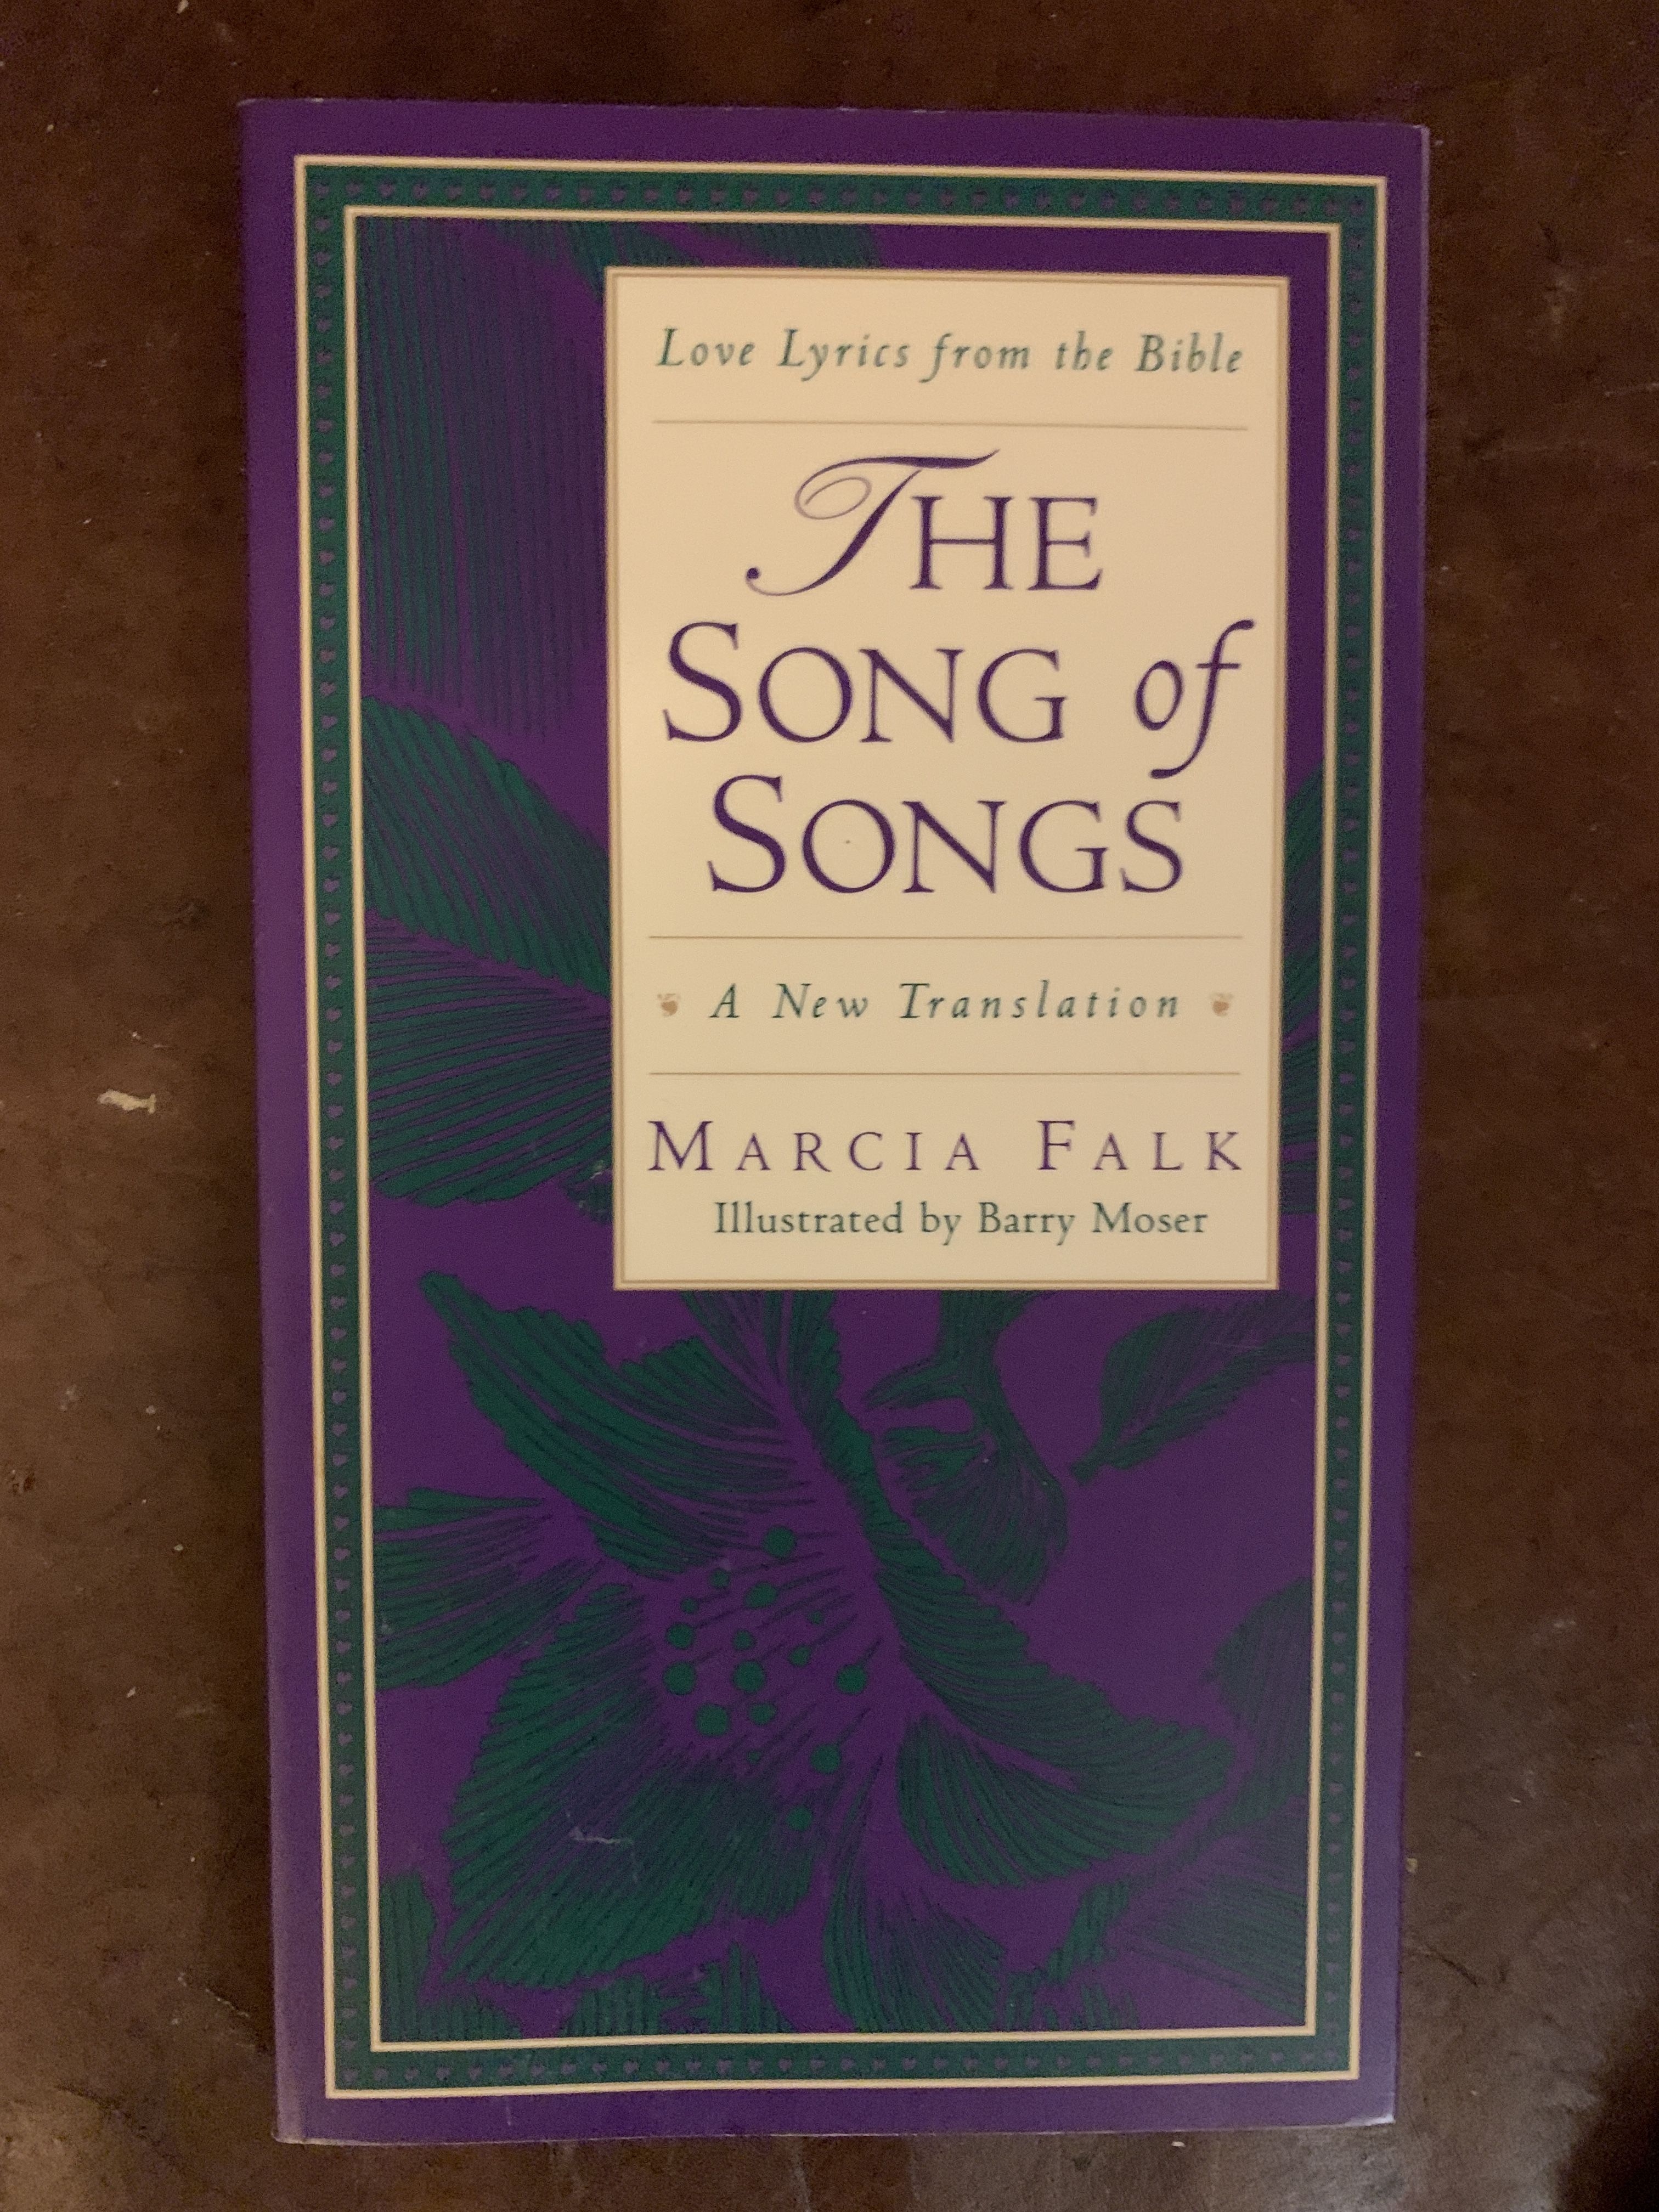 The Song of Songs A New Translation (Love Lyrics from the Bible) - Marcia Falk